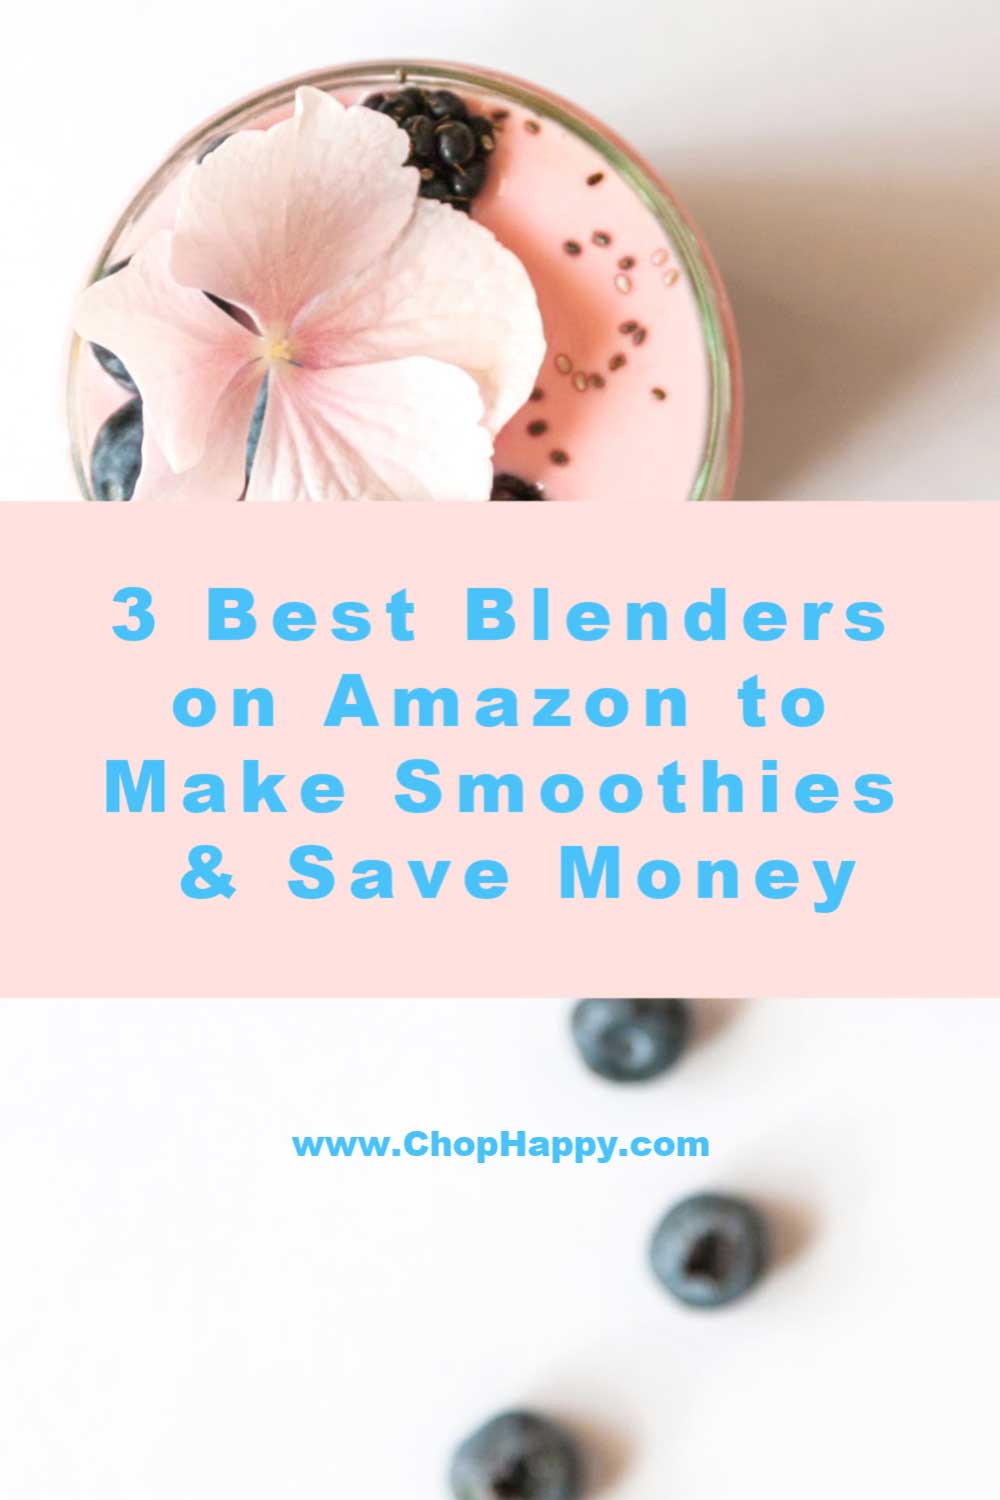 3 Best Blenders on Amazon to Make Smoothies & Save Money. When you are trying to save money making food at home is a great way to start. Smoothies are super easy to make and with the right blender they are delish. Here are 3 of the top blenders on Amazon. Happy Smoothie Making. www.ChopHappy.com #smoothies #blenders